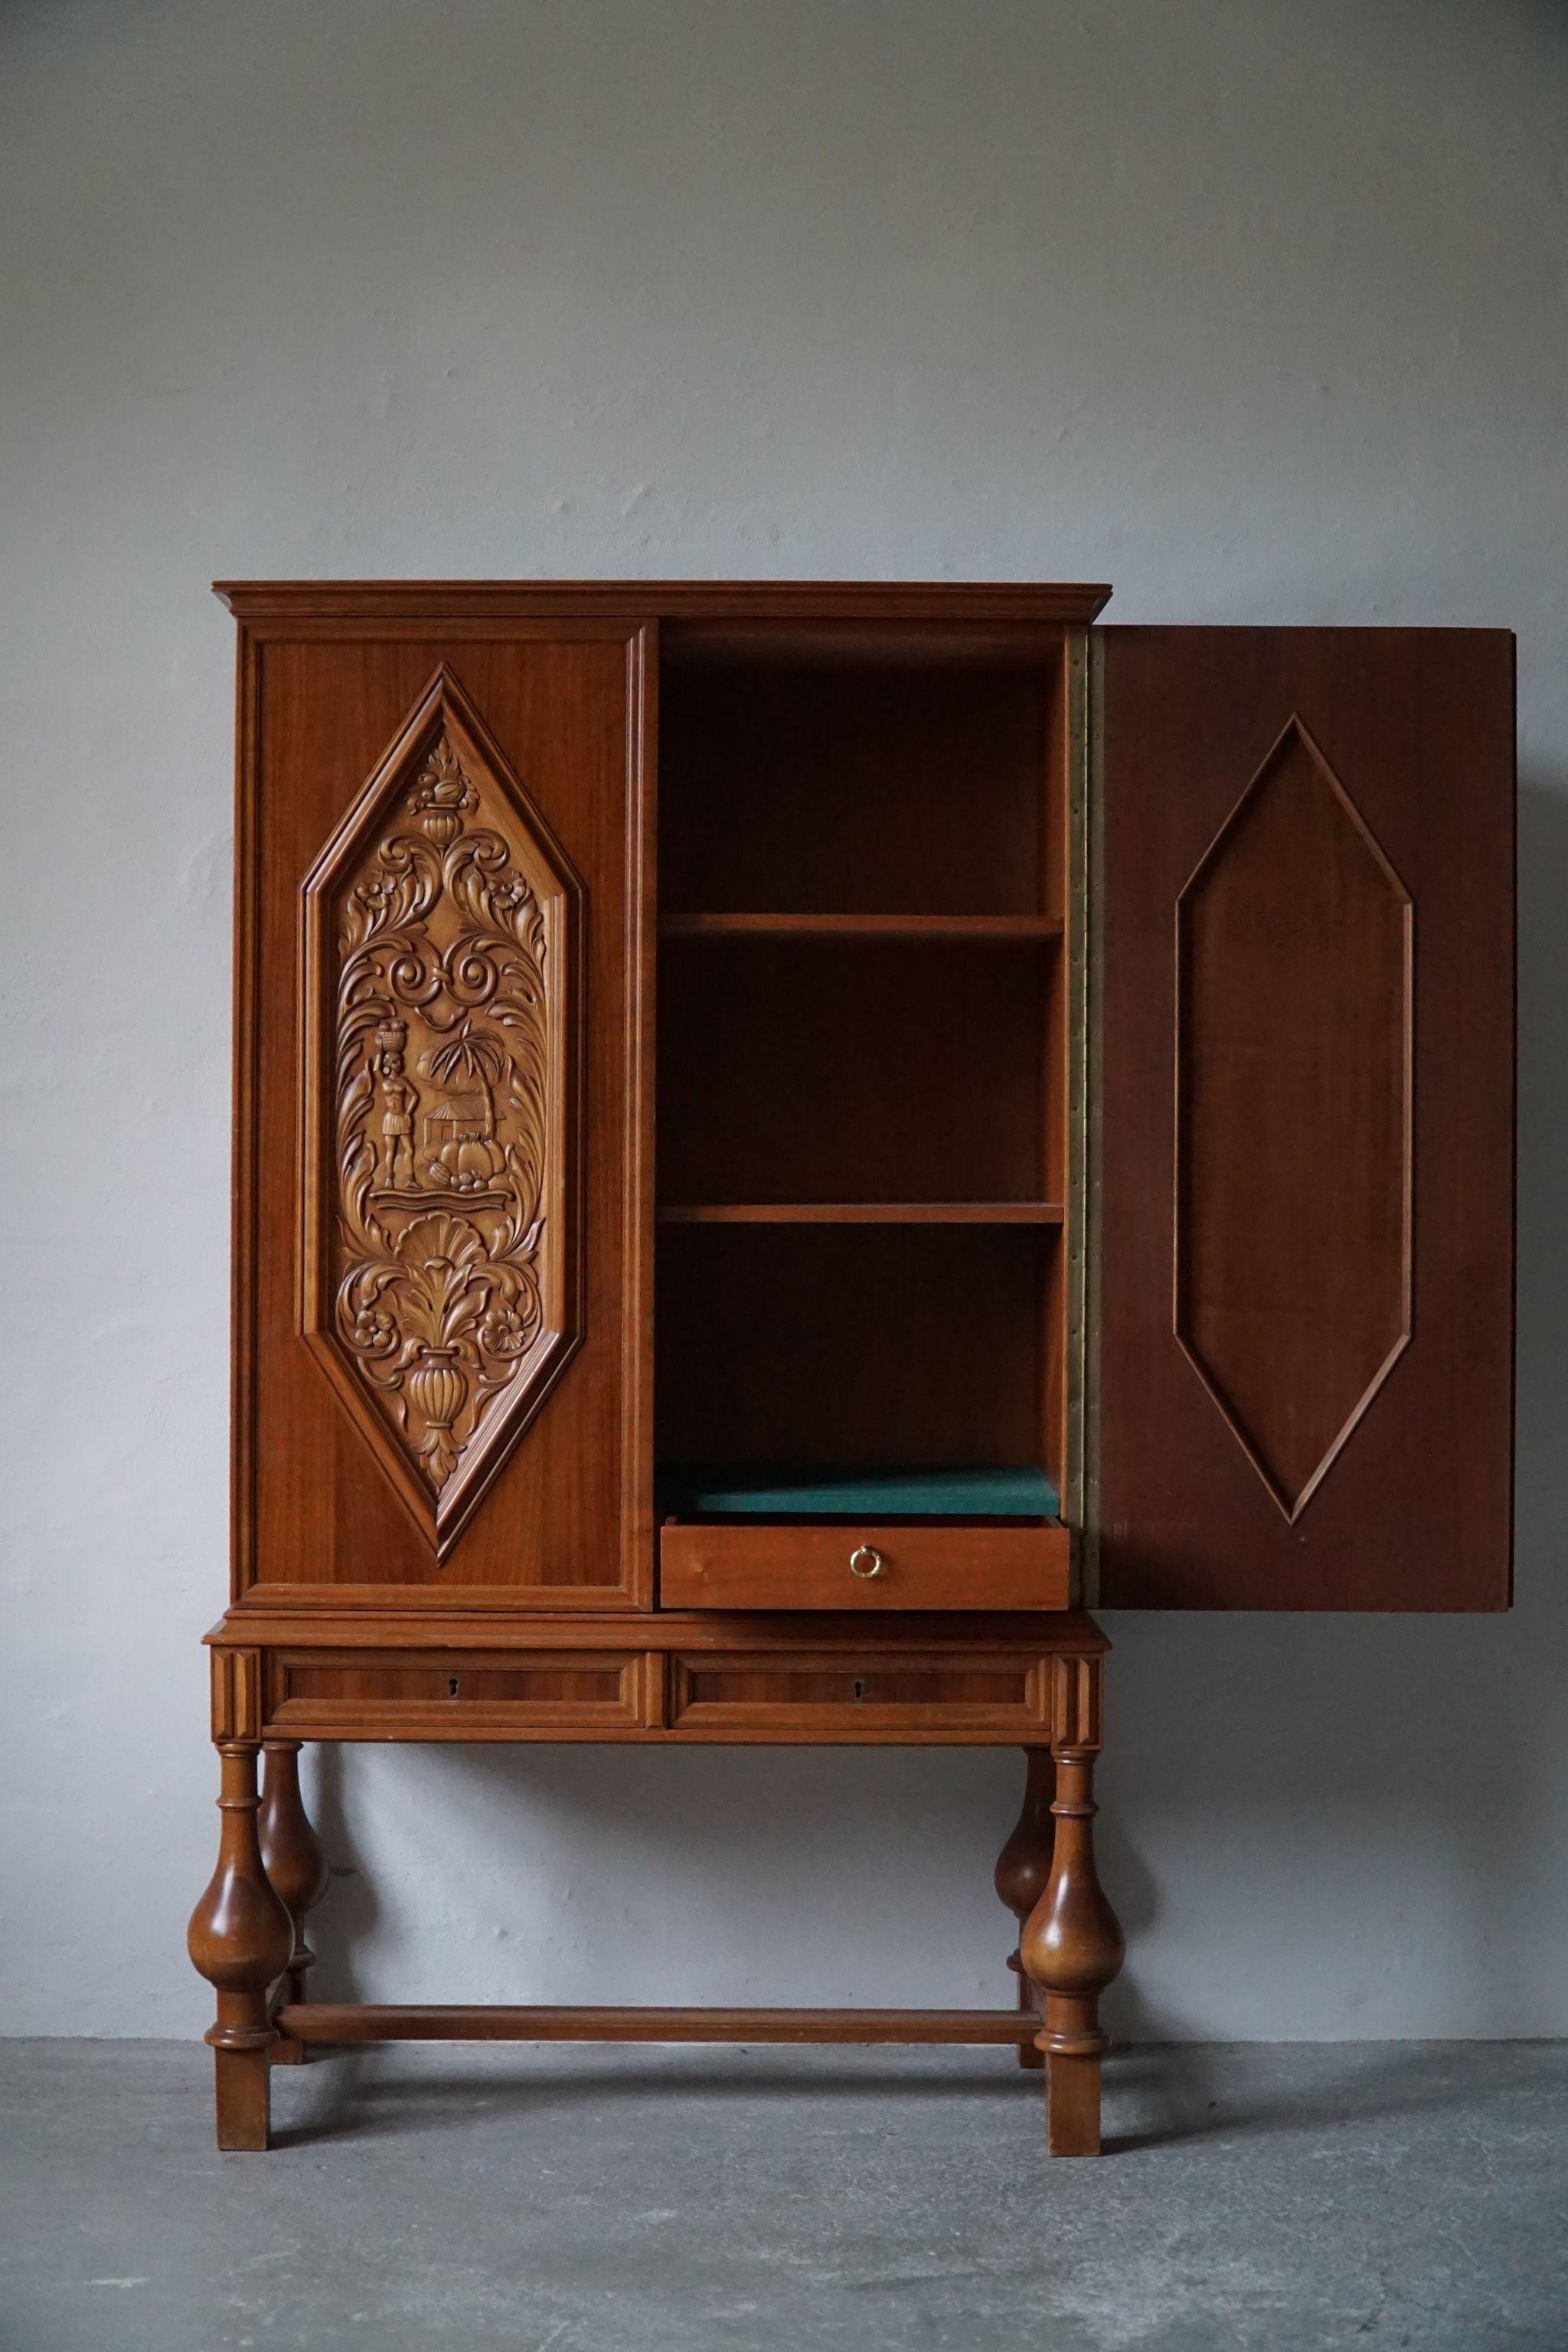 Sculptural cabinet in walnut and beech. Made by Swedish designer Eugen Höglund for Vetlanda in 1940s. 

Hand carved panels with a figurative landscape. Inside adjustable shelves and drawers.

This fine object will match many kinds of interior